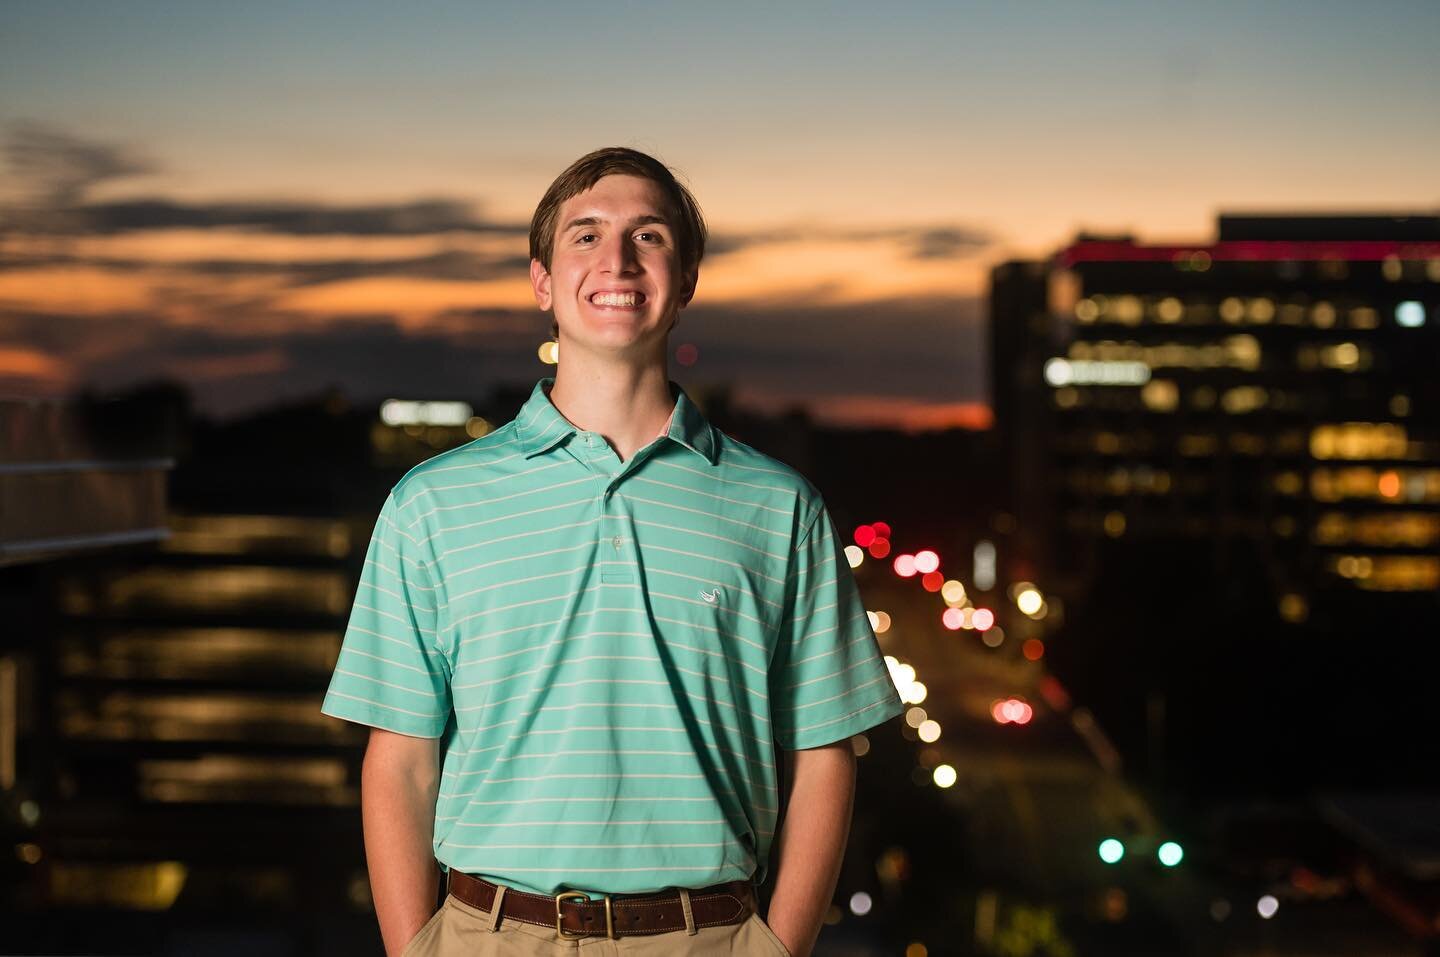 Williams senior session finished up in downtown Raleigh. We visited the spot he volunteers and where he hangs out with family. We finished up by catching sunset from the roof. William&rsquo;s family chose to enjoy these images in a beautiful album in